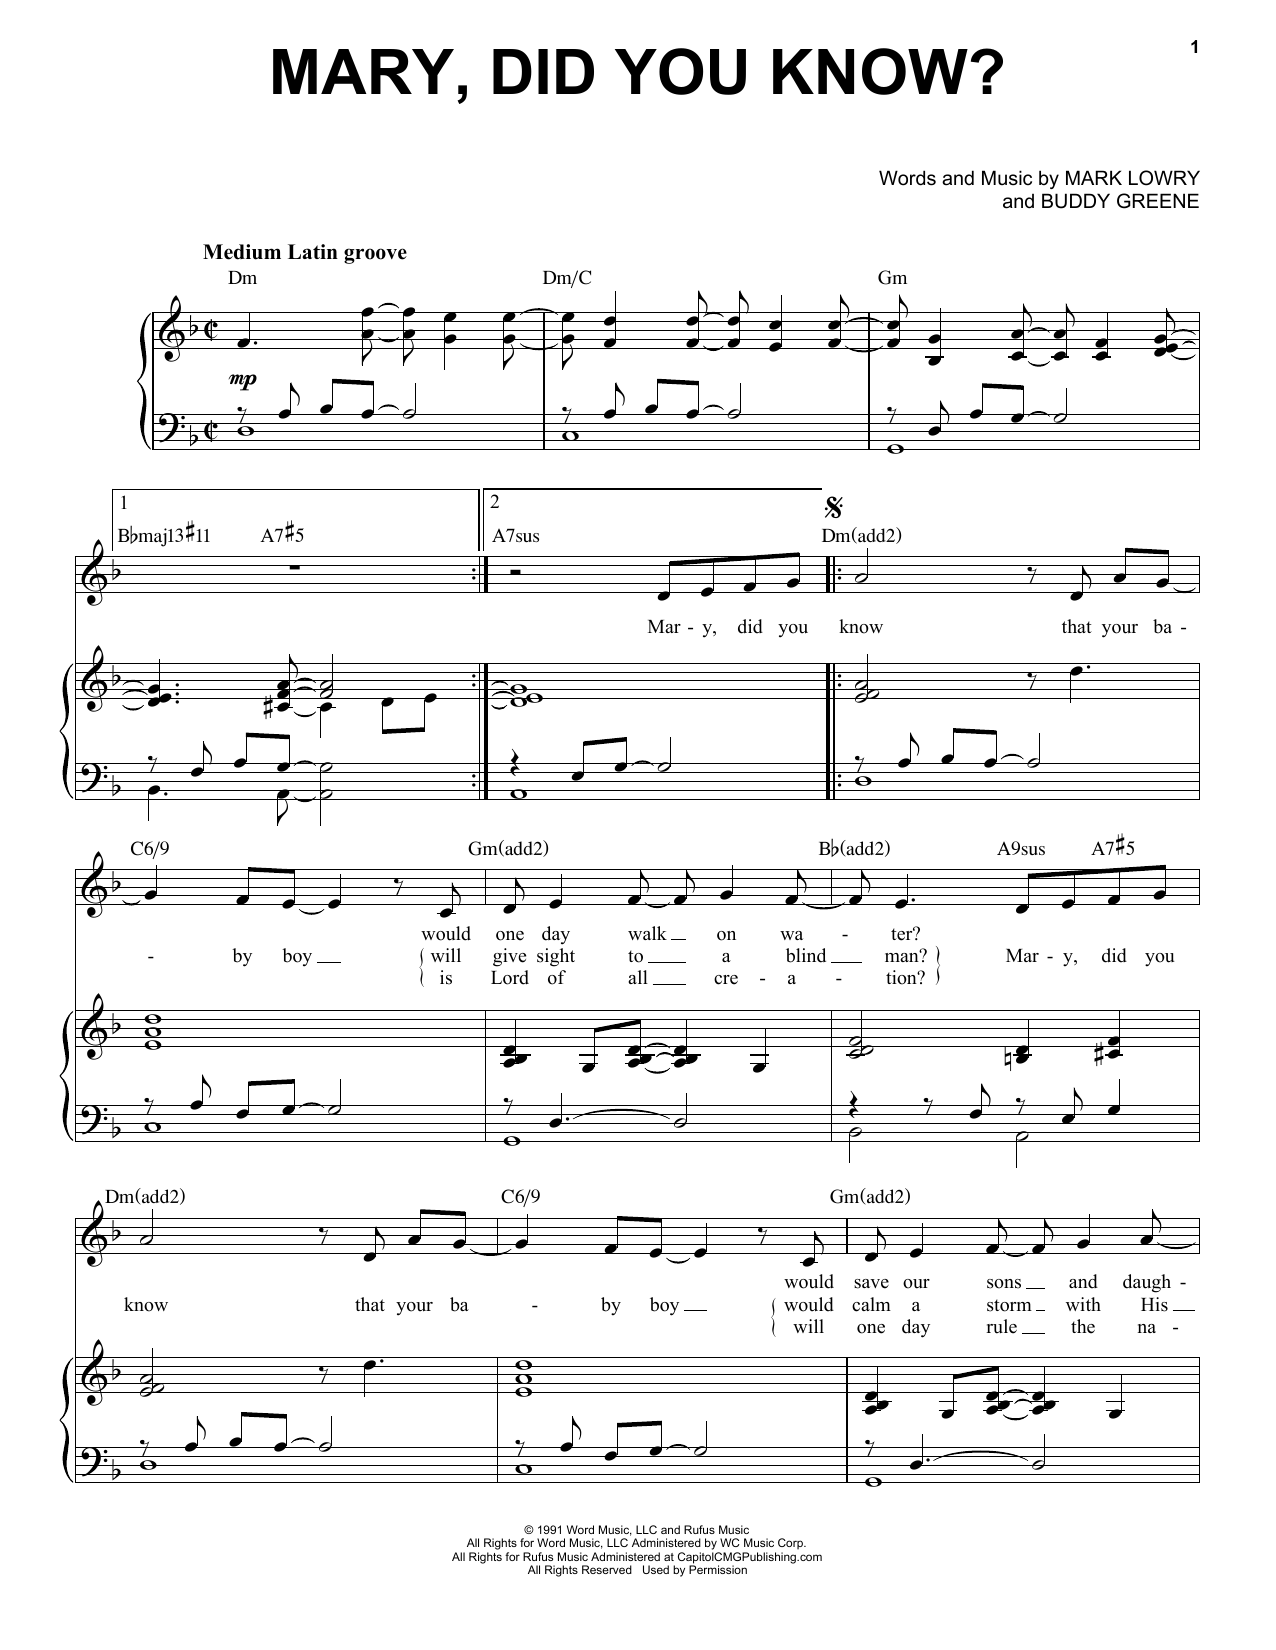 Download Mark Lowry & Buddy Greene Mary, Did You Know? [Jazz Version] (arr Sheet Music